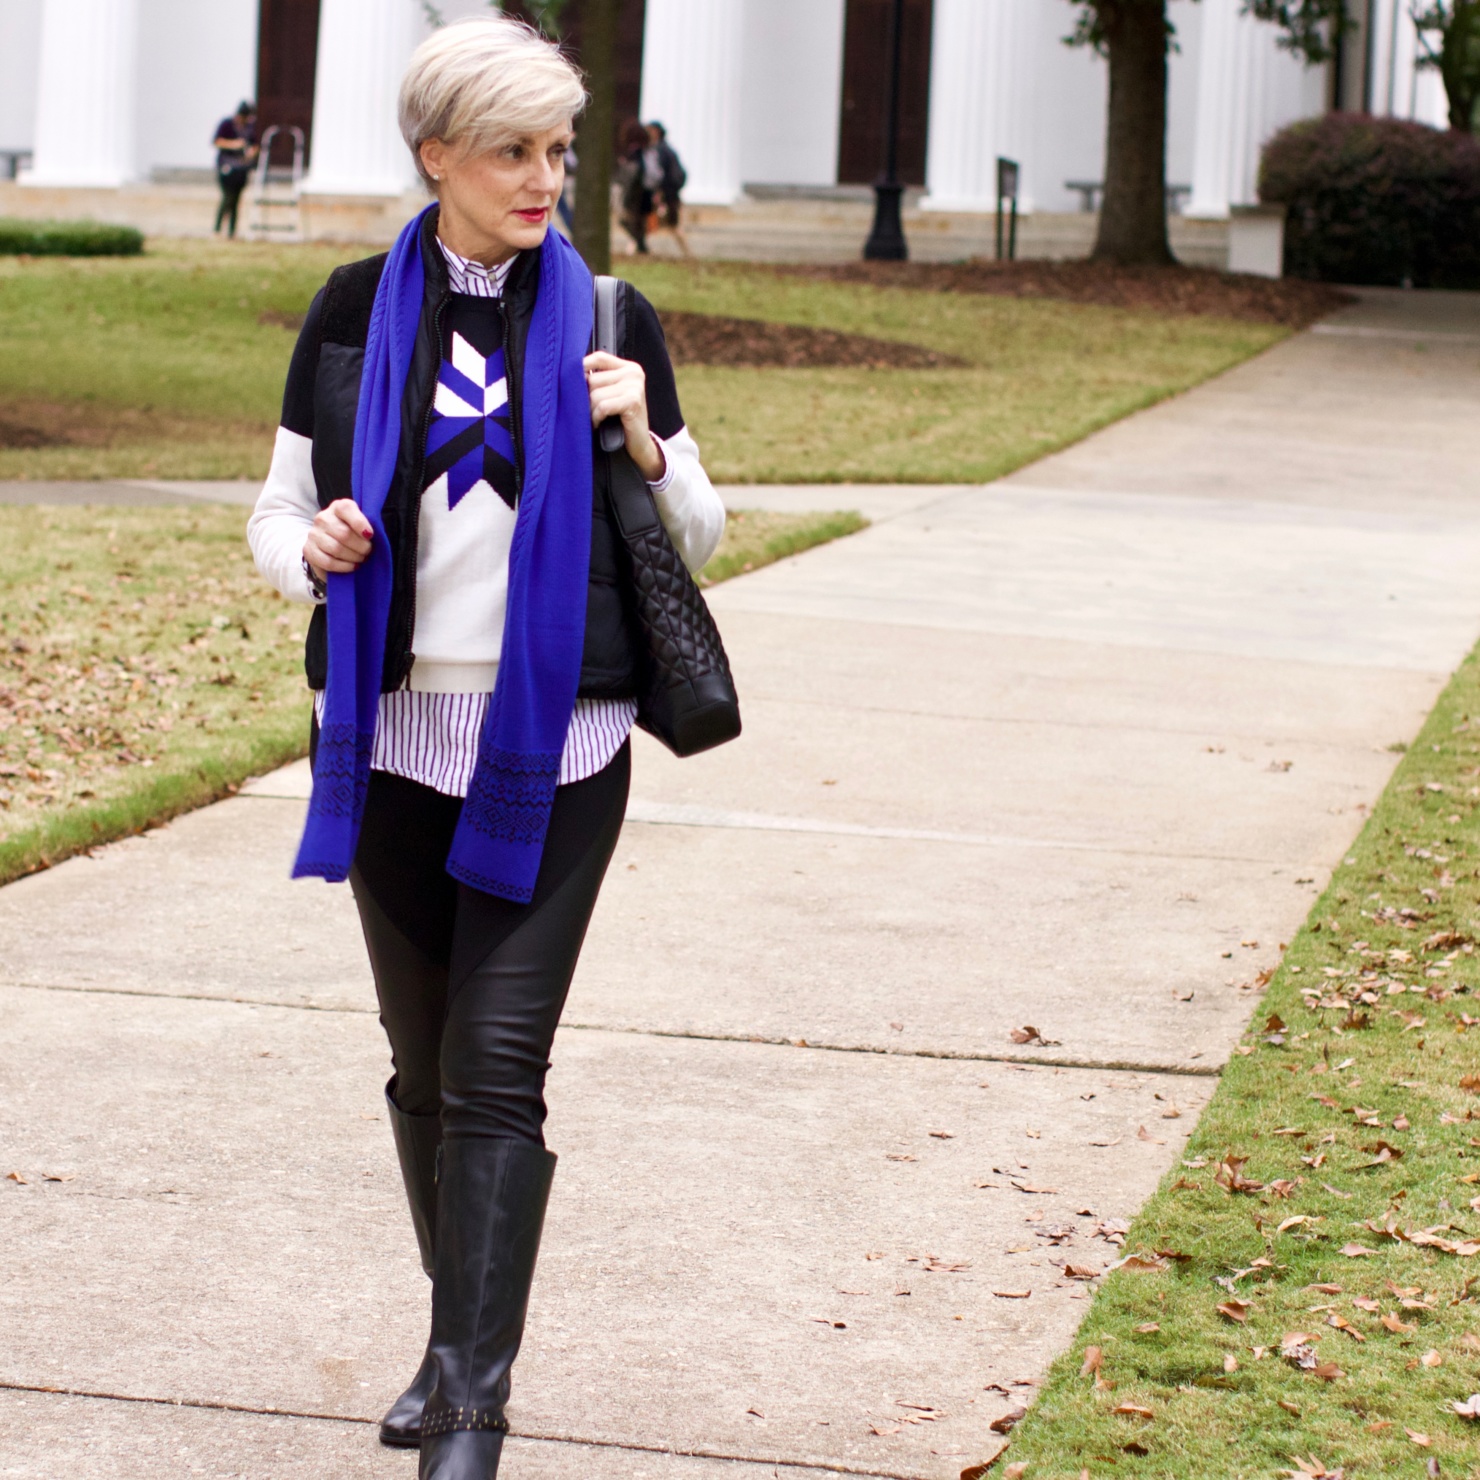 beth from Style at a Certain Age wears a snowflake intarsia sweater, DKNY ponte leggings, striped shirt, riding boots, and a cobalt blue intarsia trim scarf